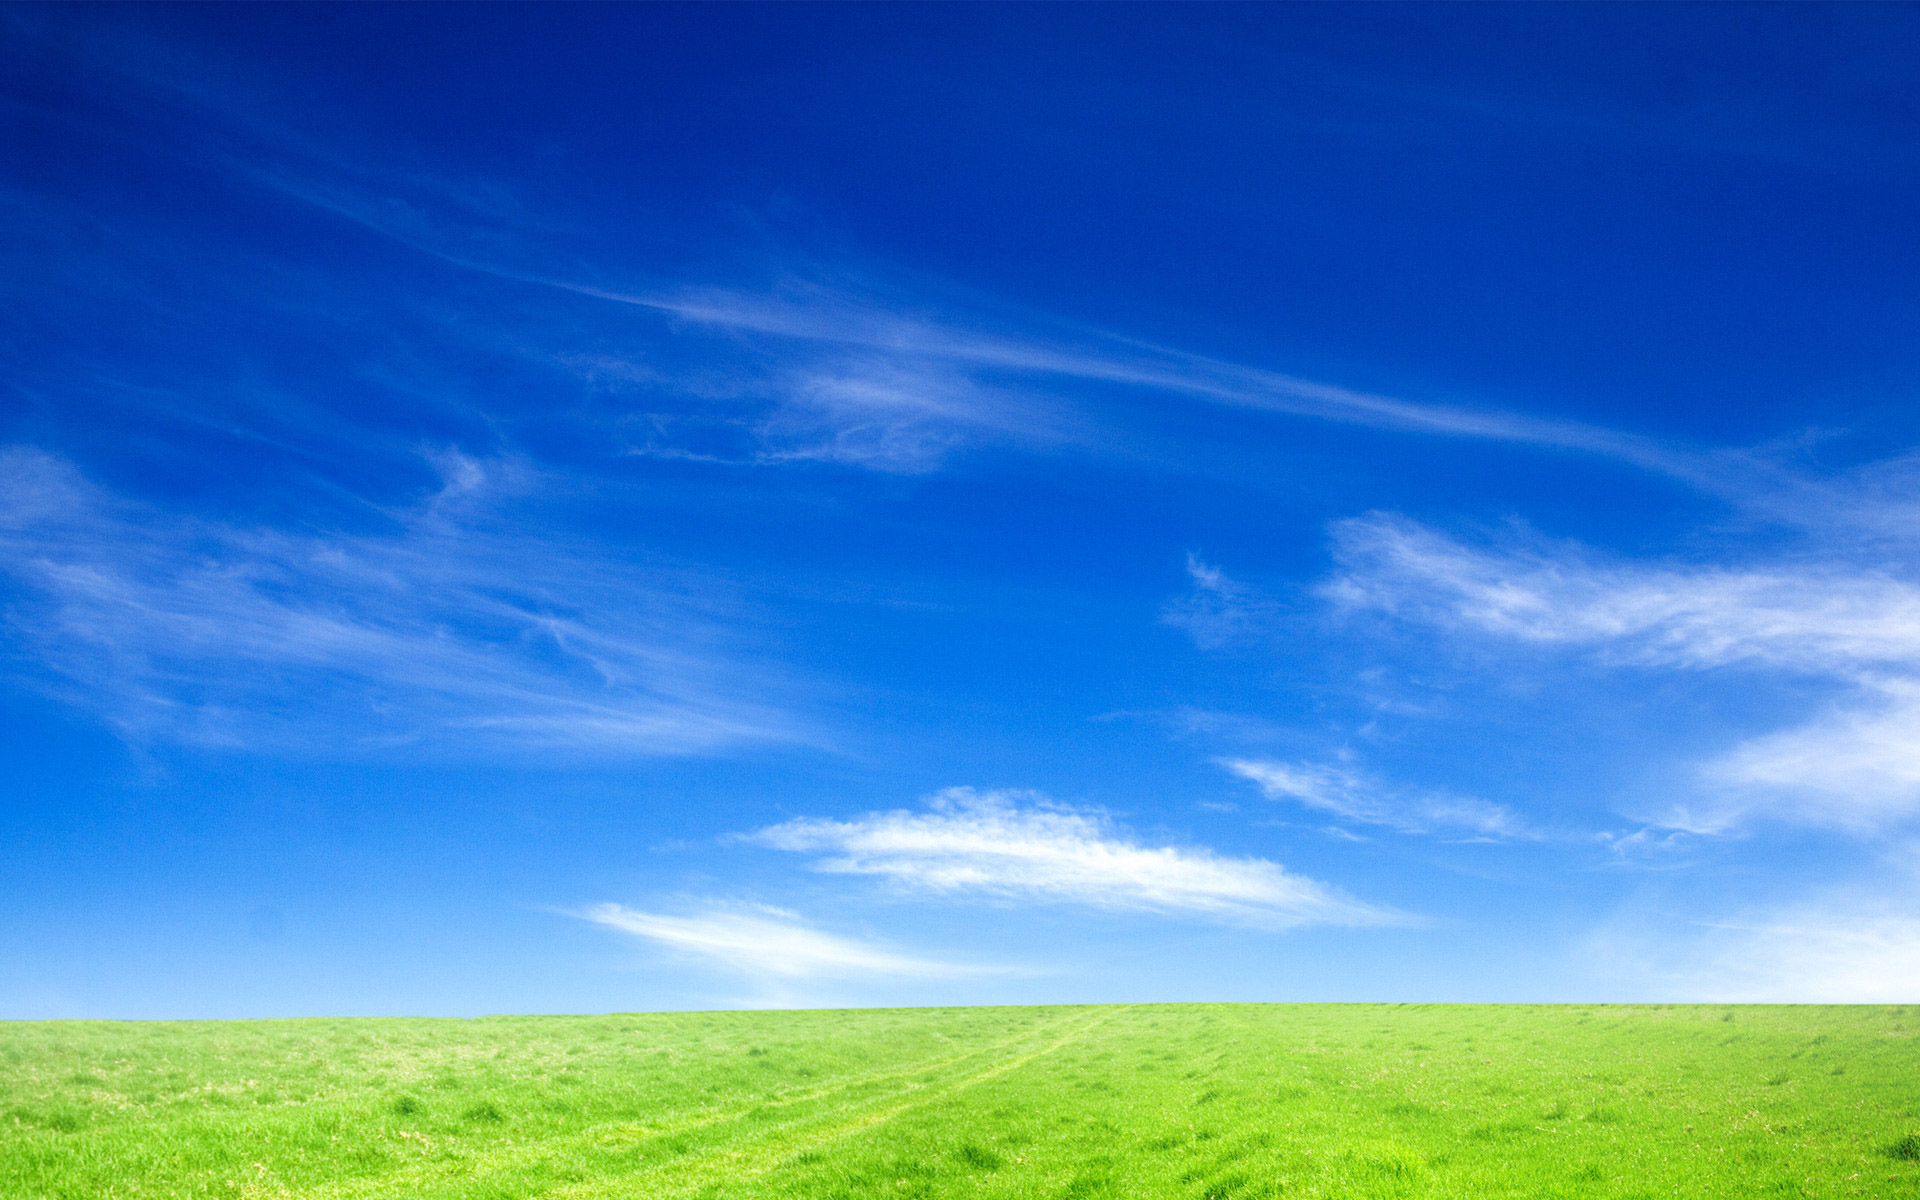 Blue Sky and Green Grass Hd Backgrounds for Powerpoint Templates - PPT